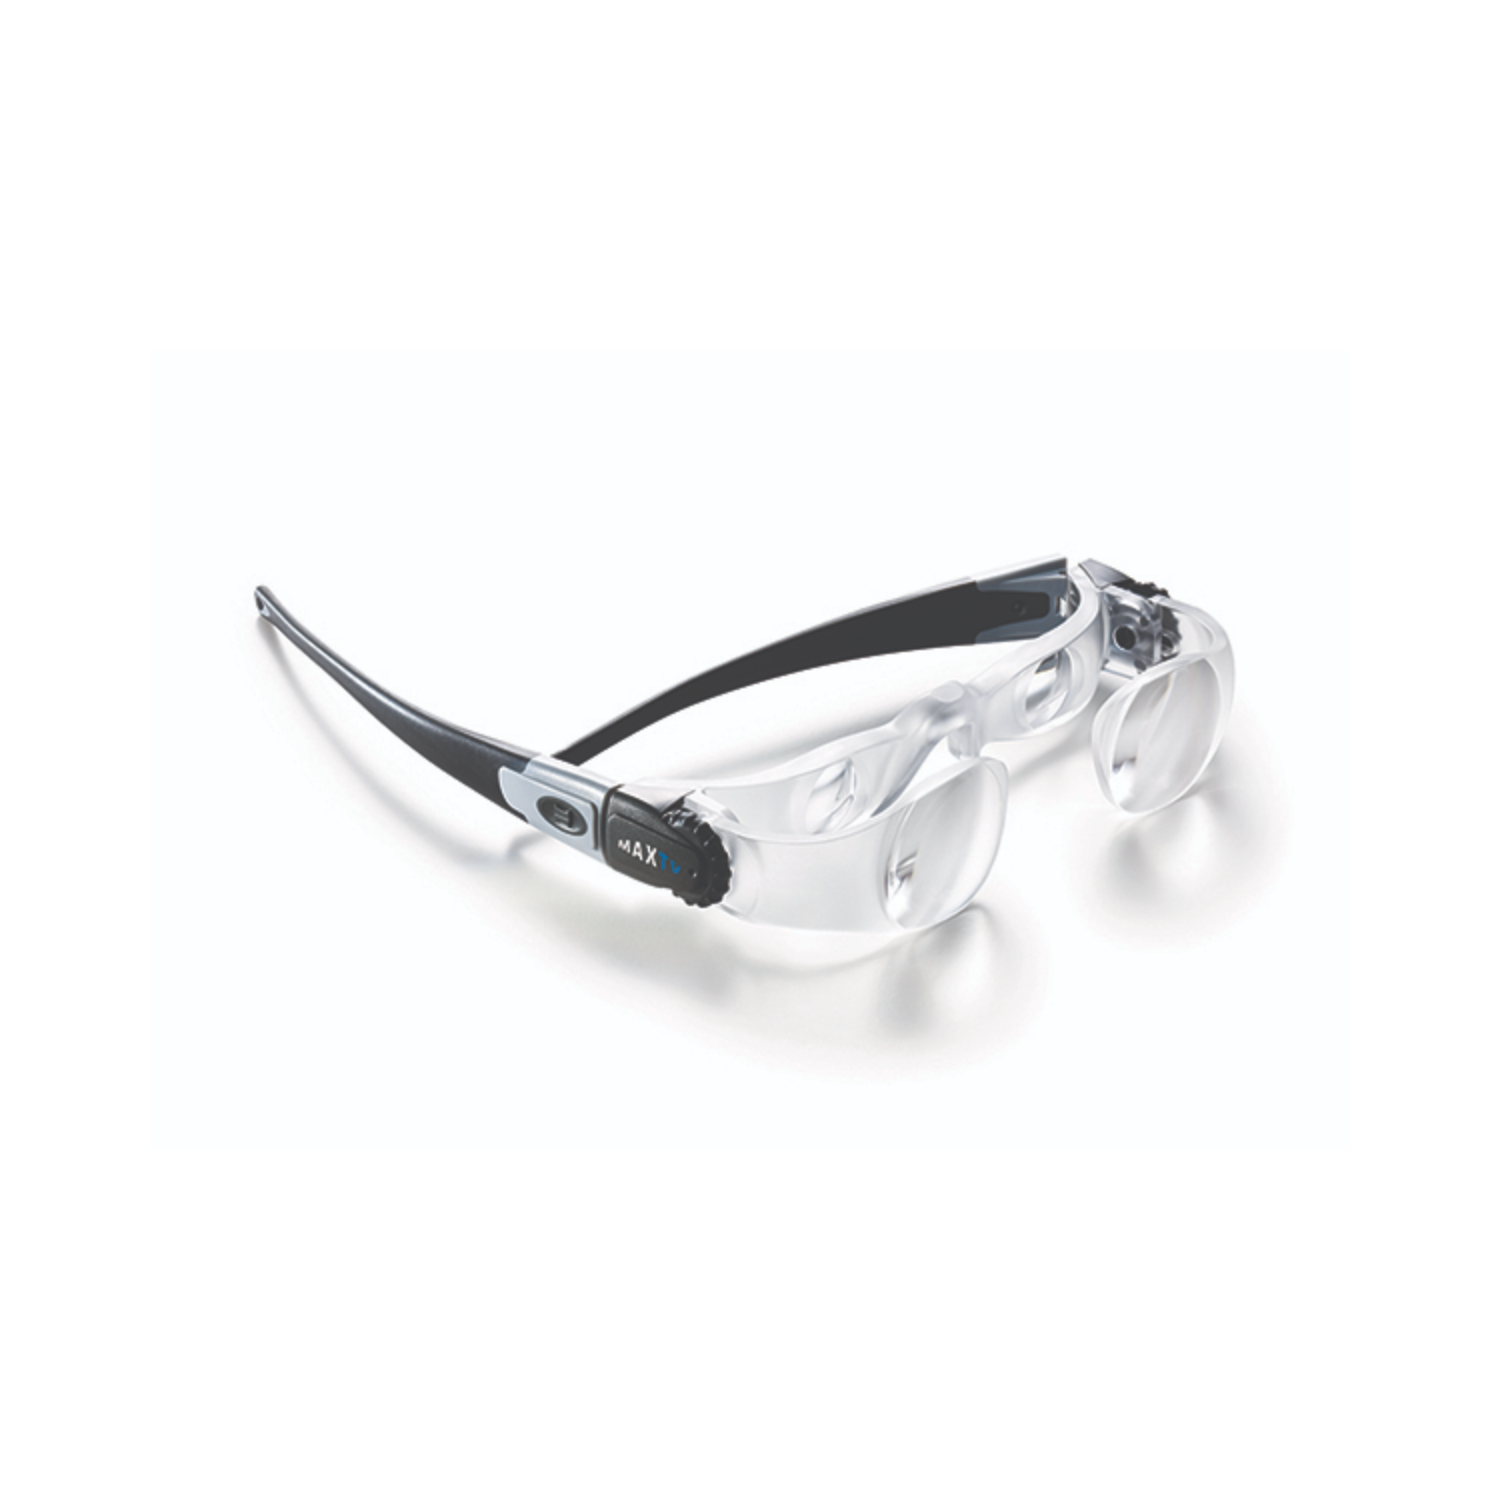 Image of the MaxTV distance wearable magnifying glasses from Eschenbach.